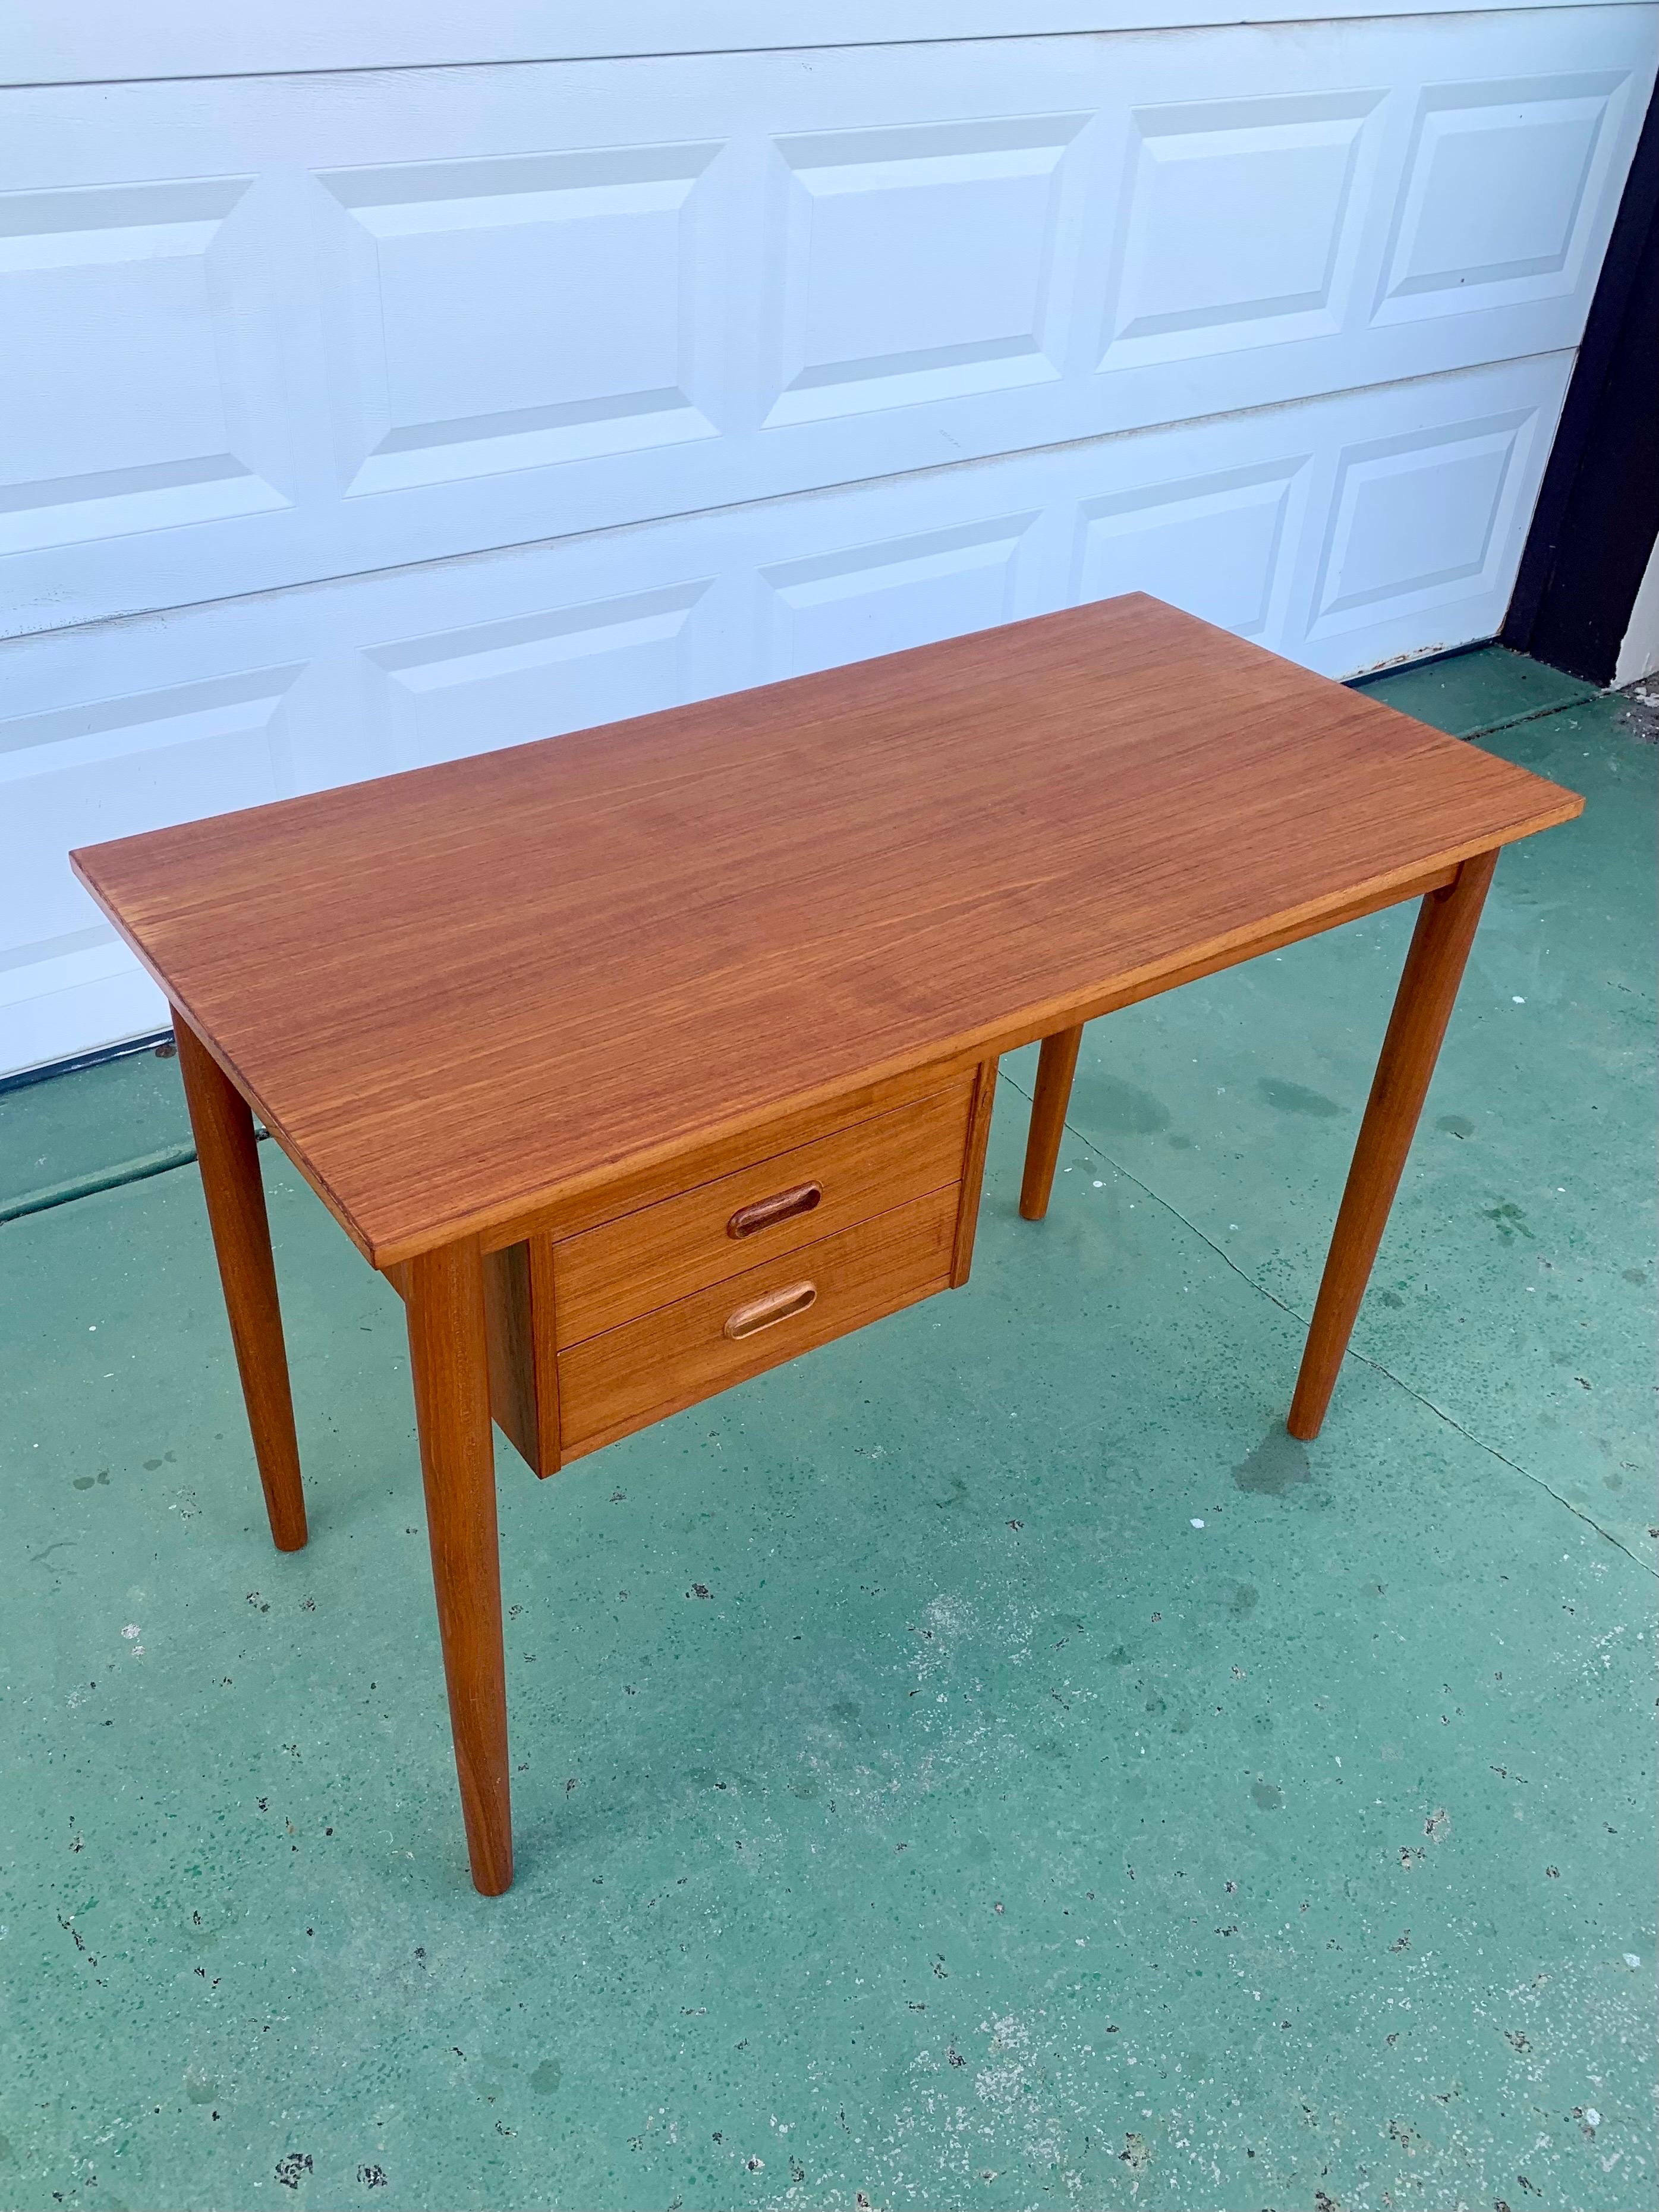 Mid-Century Modern writing desk in teak. Made in Denmark. Beautiful solid teak legs and skirt. With a beautifully veneered top with a border. The top has been refinished and the piece is in excellent condition. 

Two drawers for storage and it’s